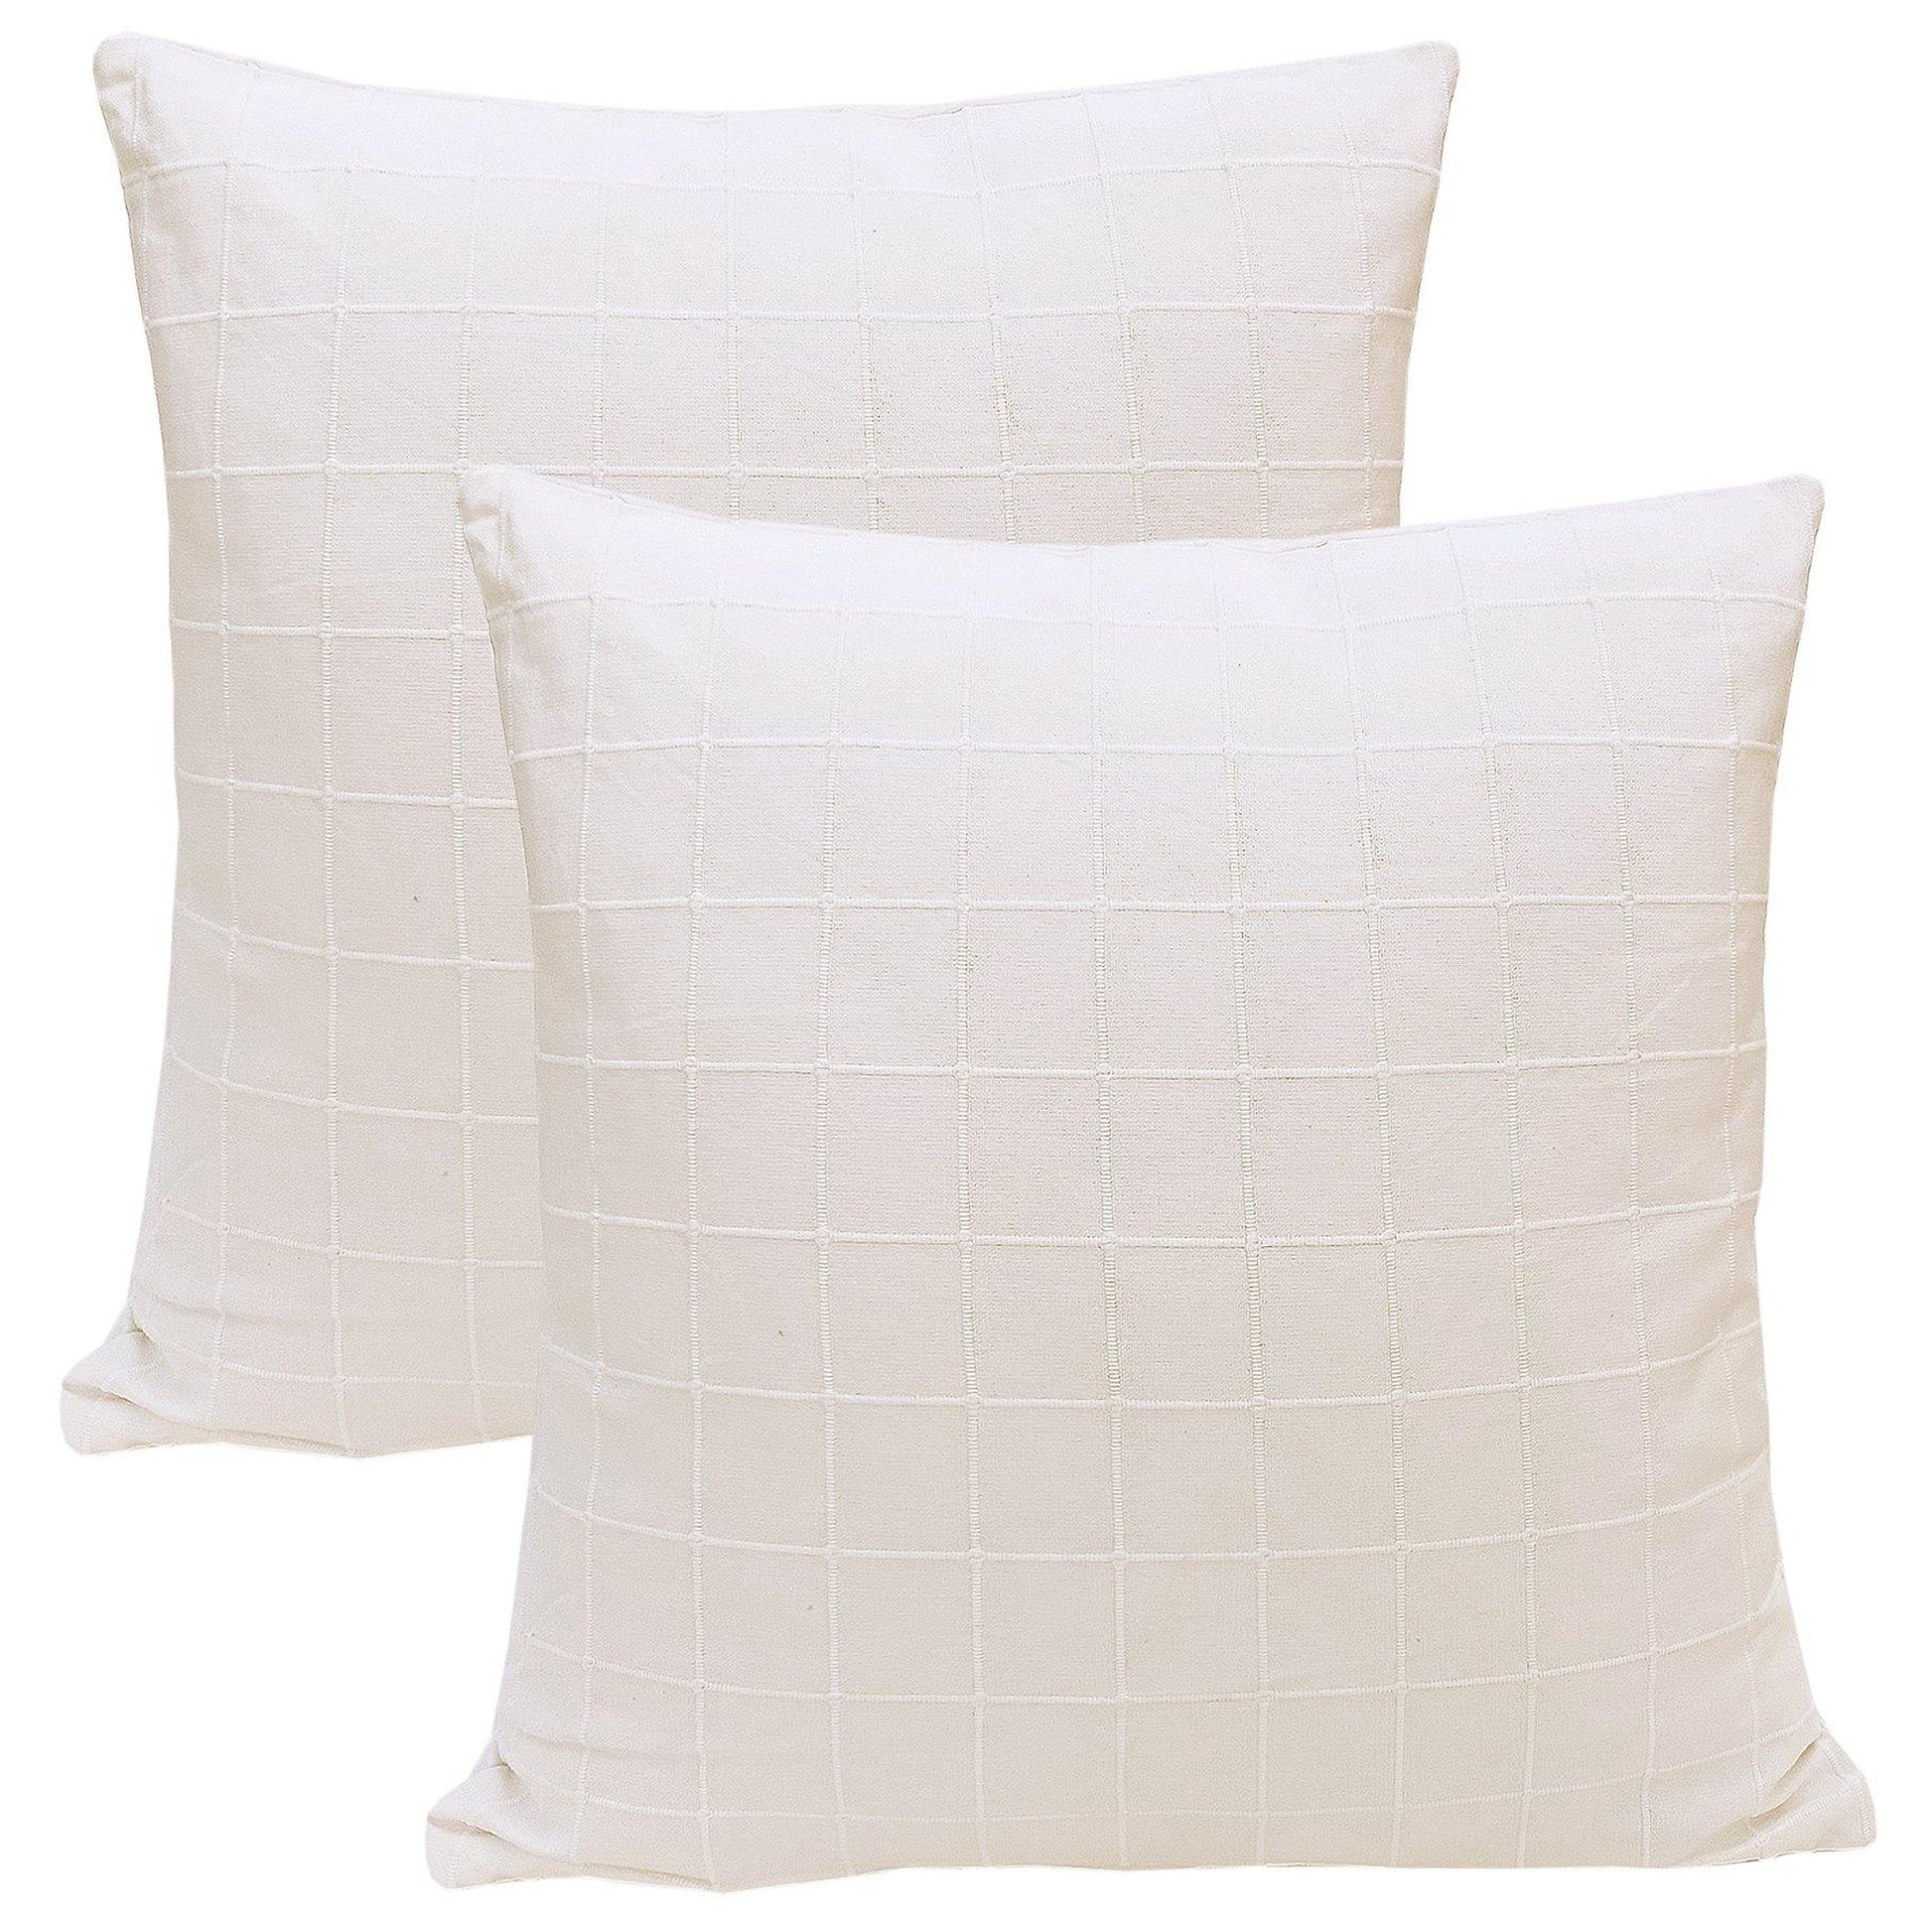 18" Off White Checkered Cotton Cushion Cover - The Teal Thread